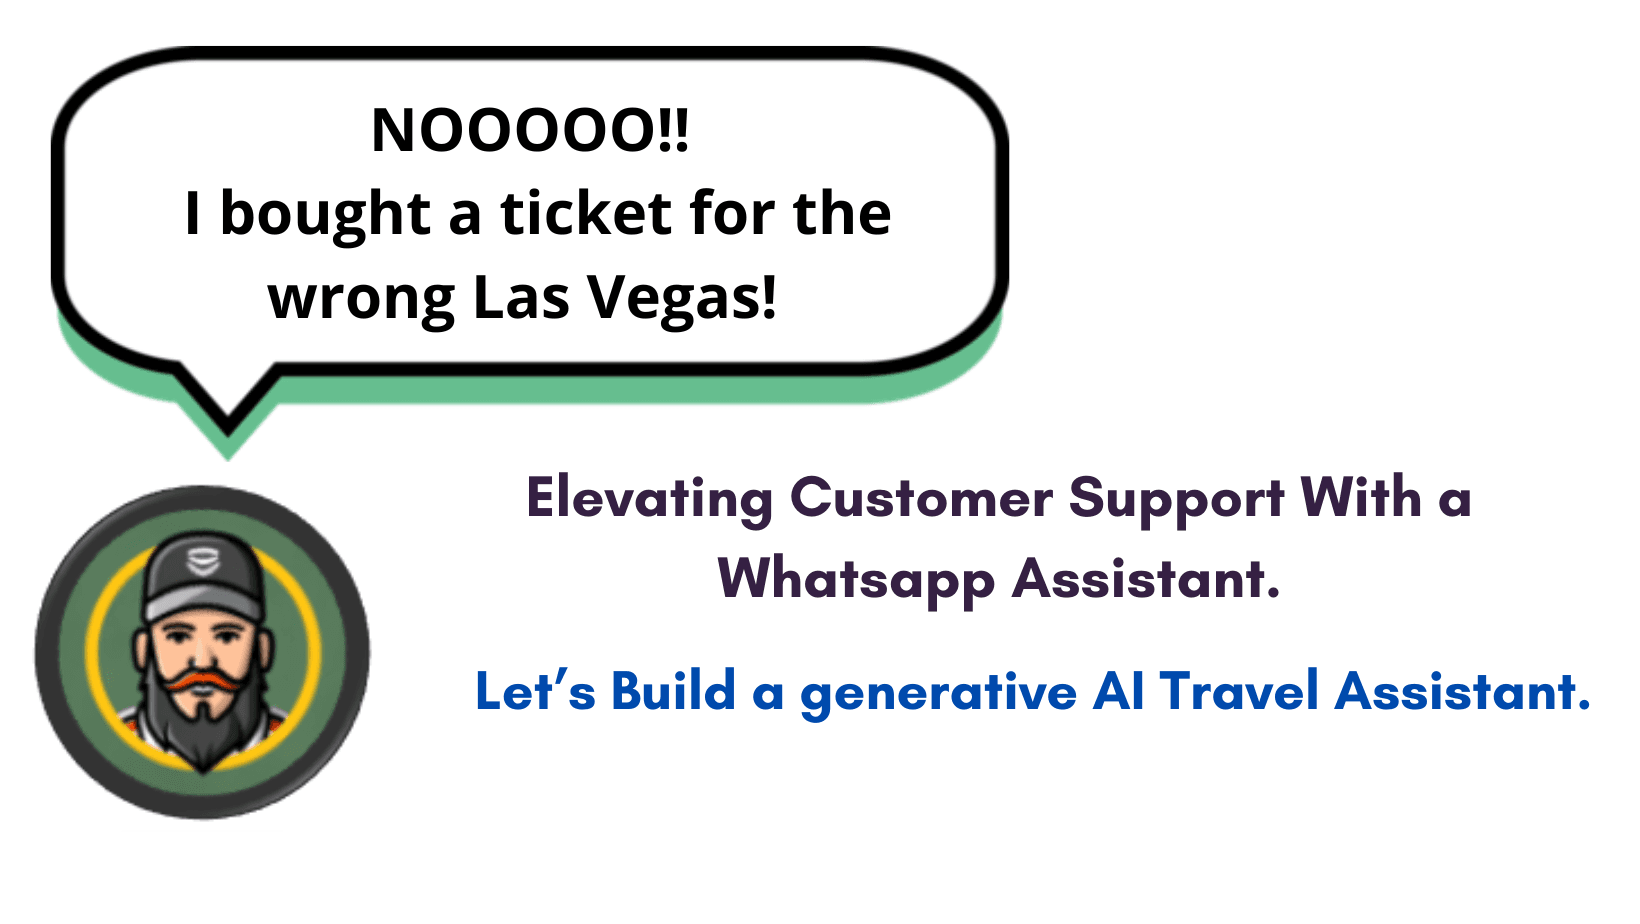 Elevating Customer Support With a Whatsapp Assistant.